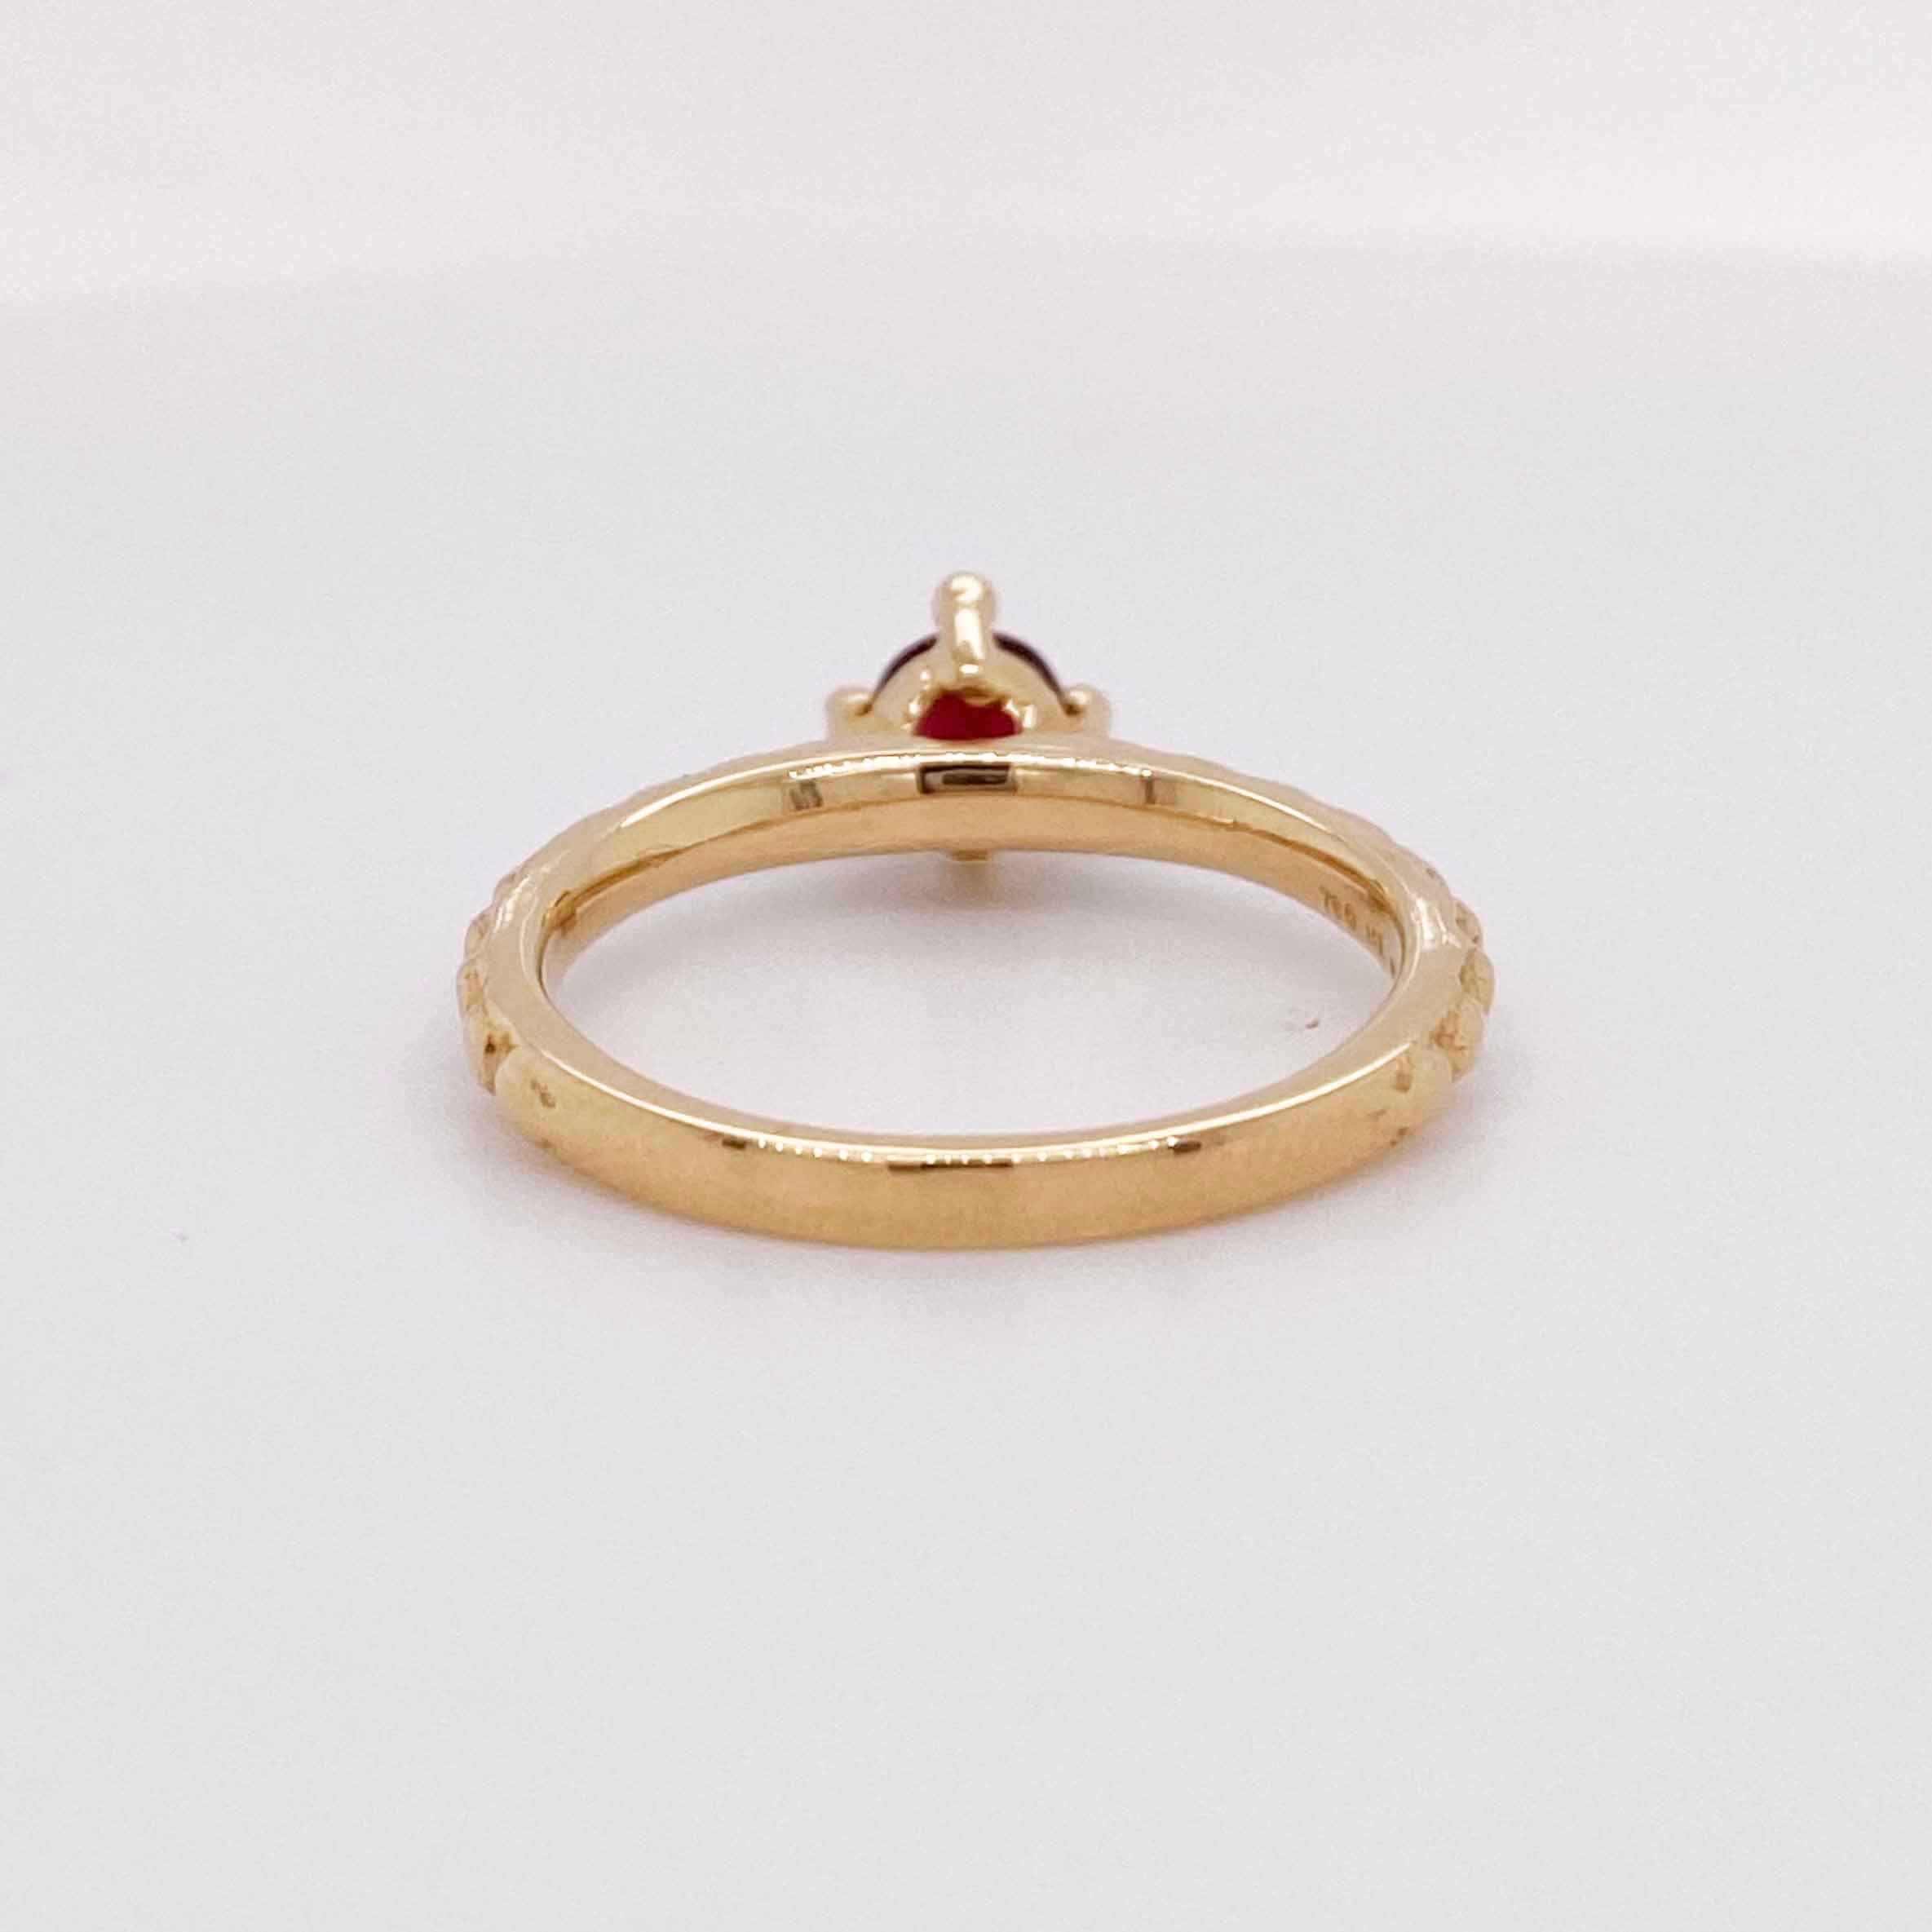 For Sale:  Garnet Solitaire Ring, Yellow Gold, Beaded Band, .45 Carat Round Garnet 4